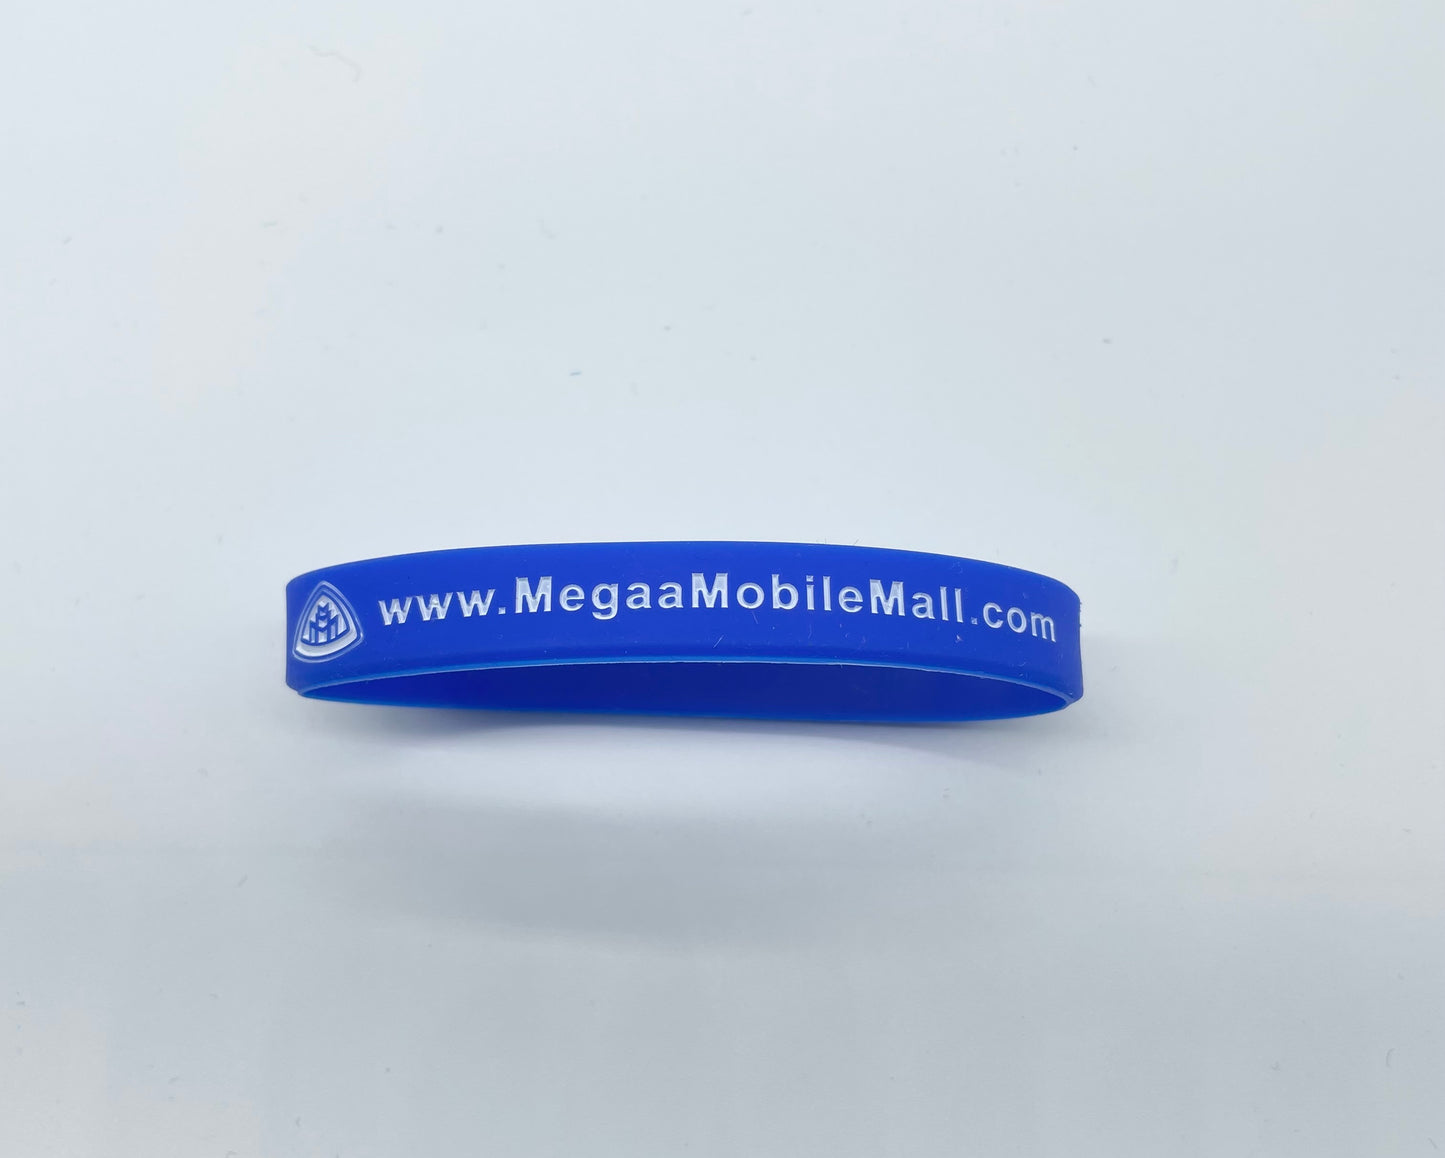 megaamobilemall wrist bands available in blue